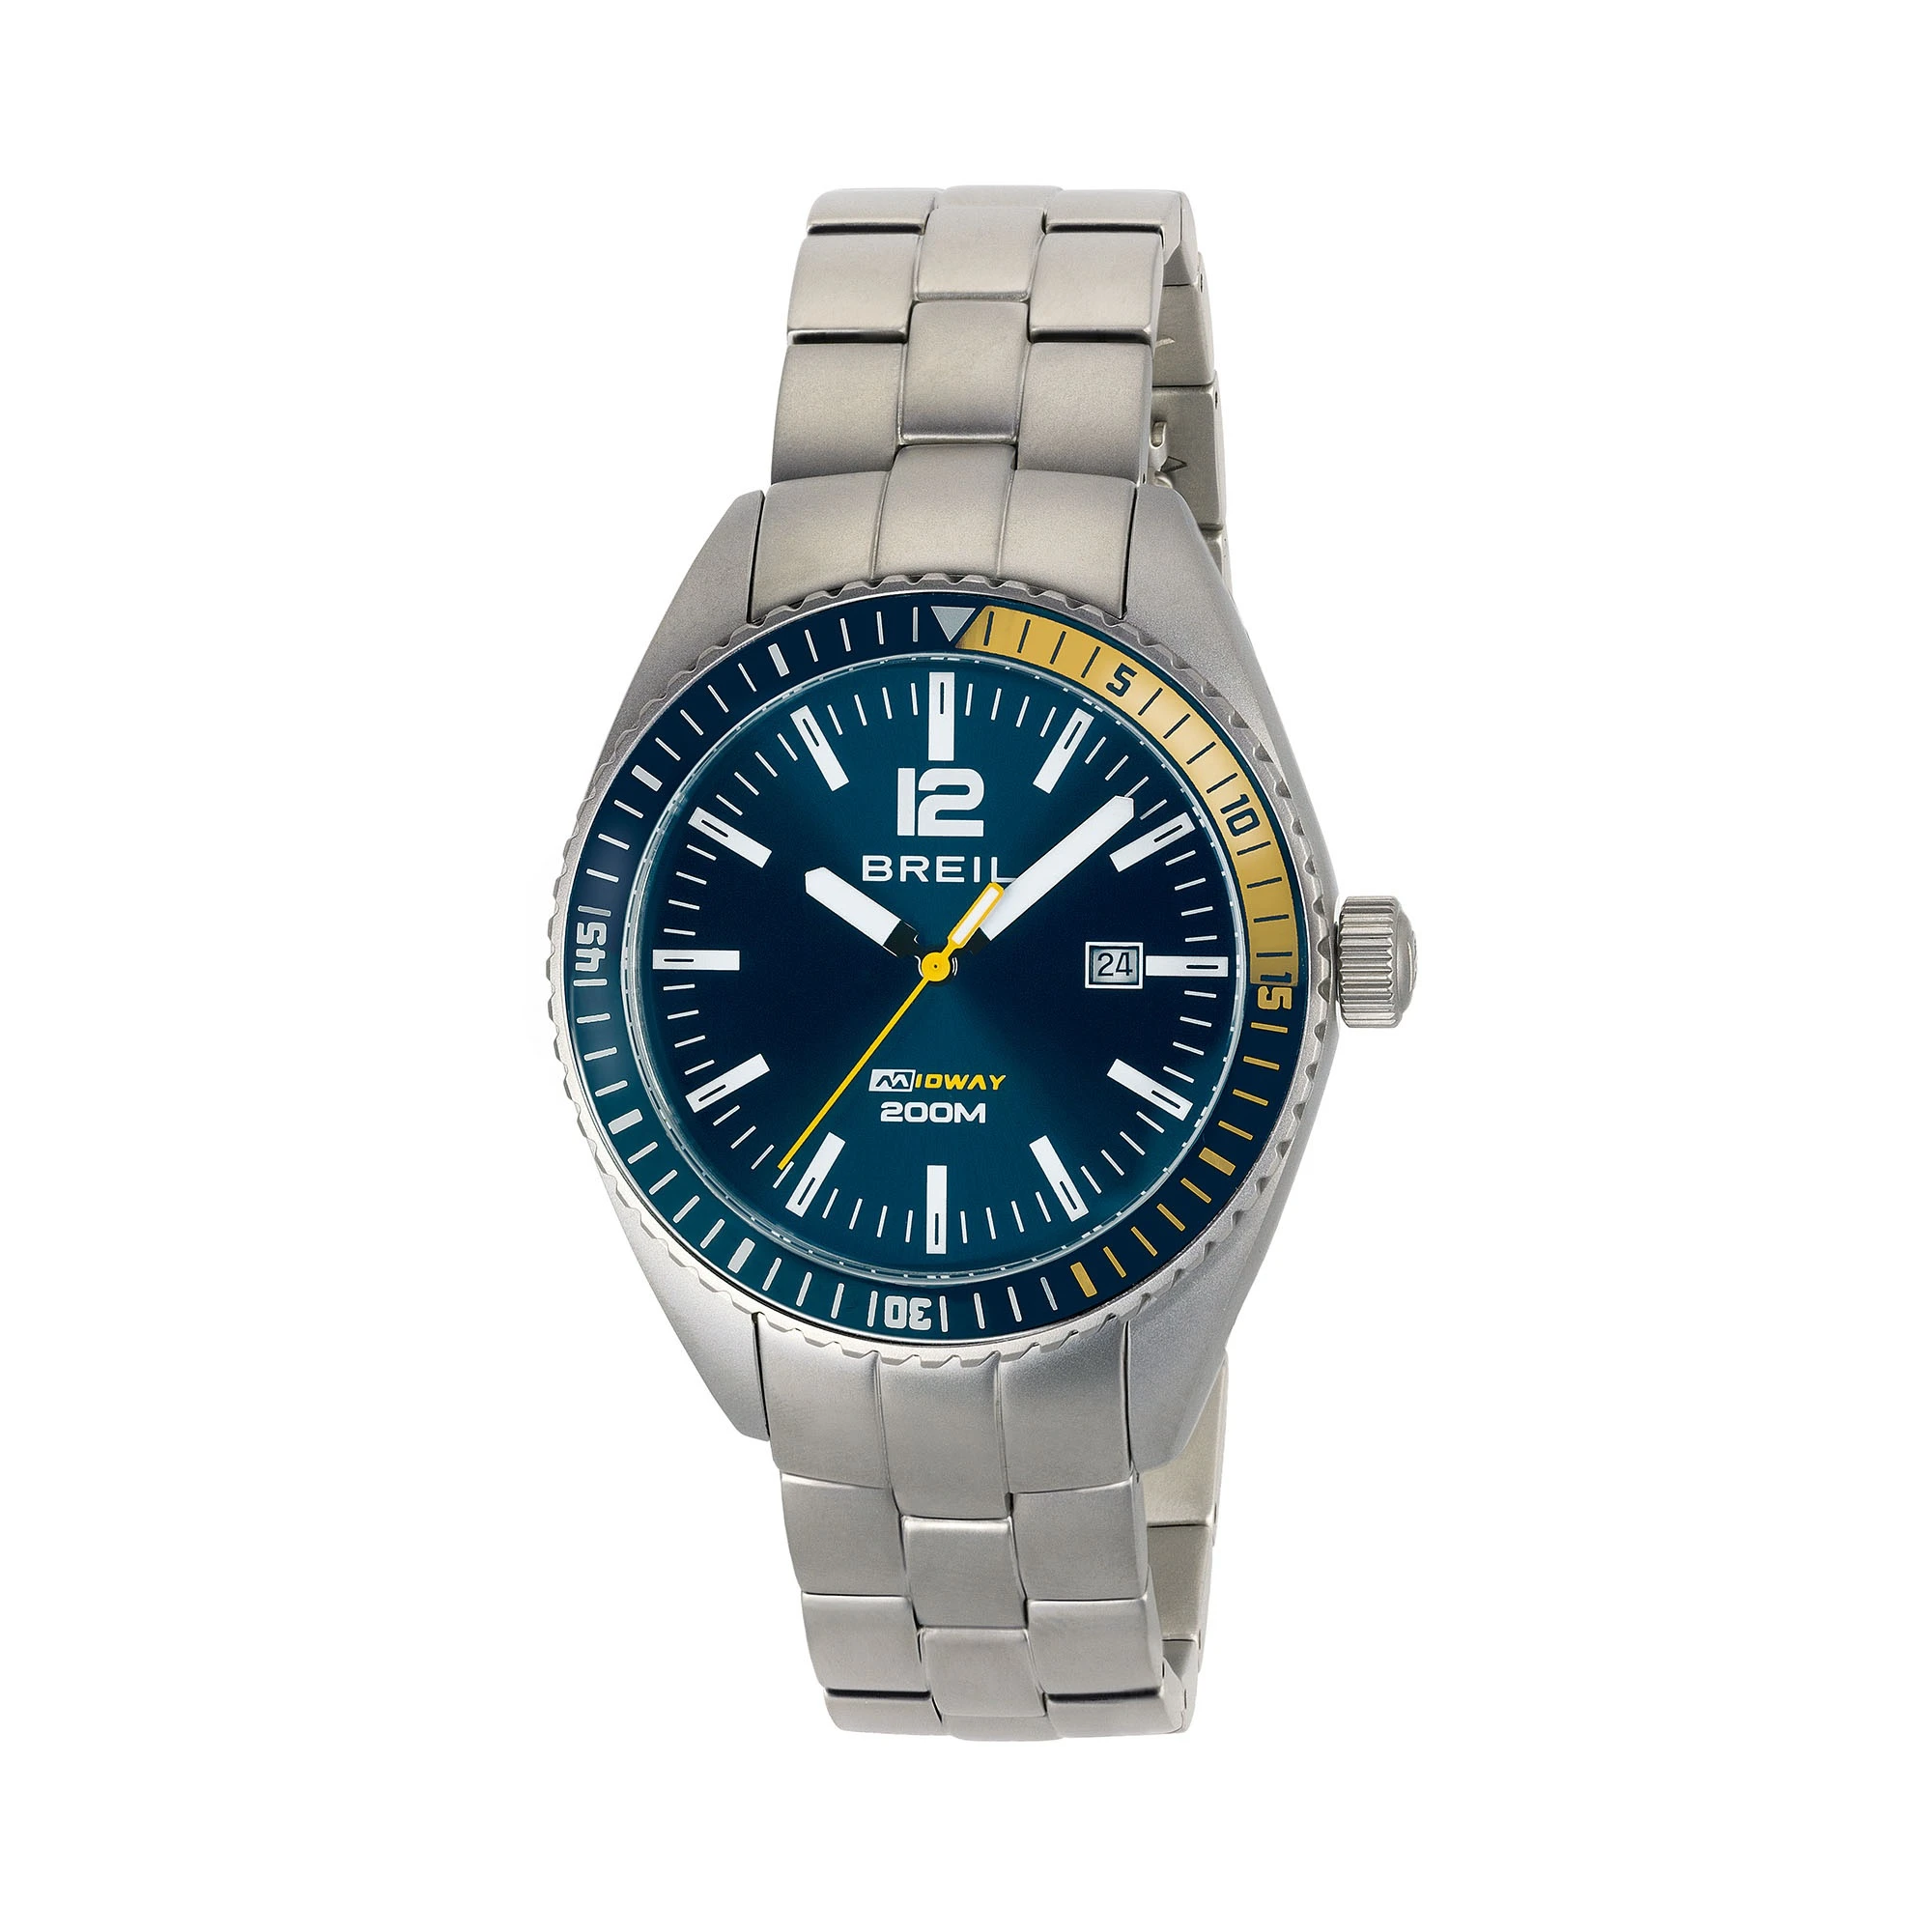 MIDWAY - TIME ONLY DIVER GENT 42 MM - 1 - TW1630 | Breil